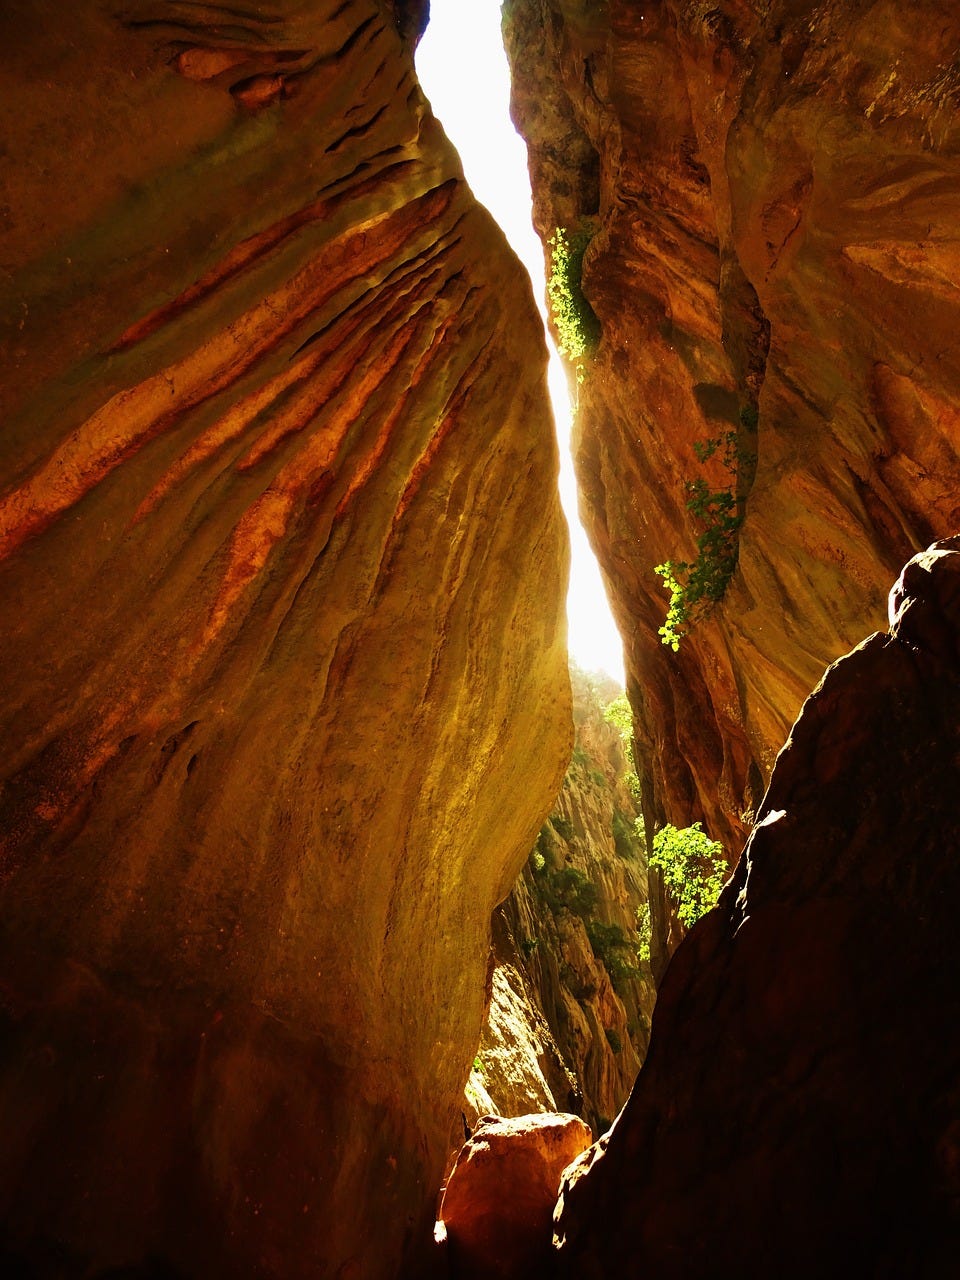 Looking upwards between two rock walls of a crevice. The sunlight glares from the top of the crack, and softly lights the walls in an orange glow.